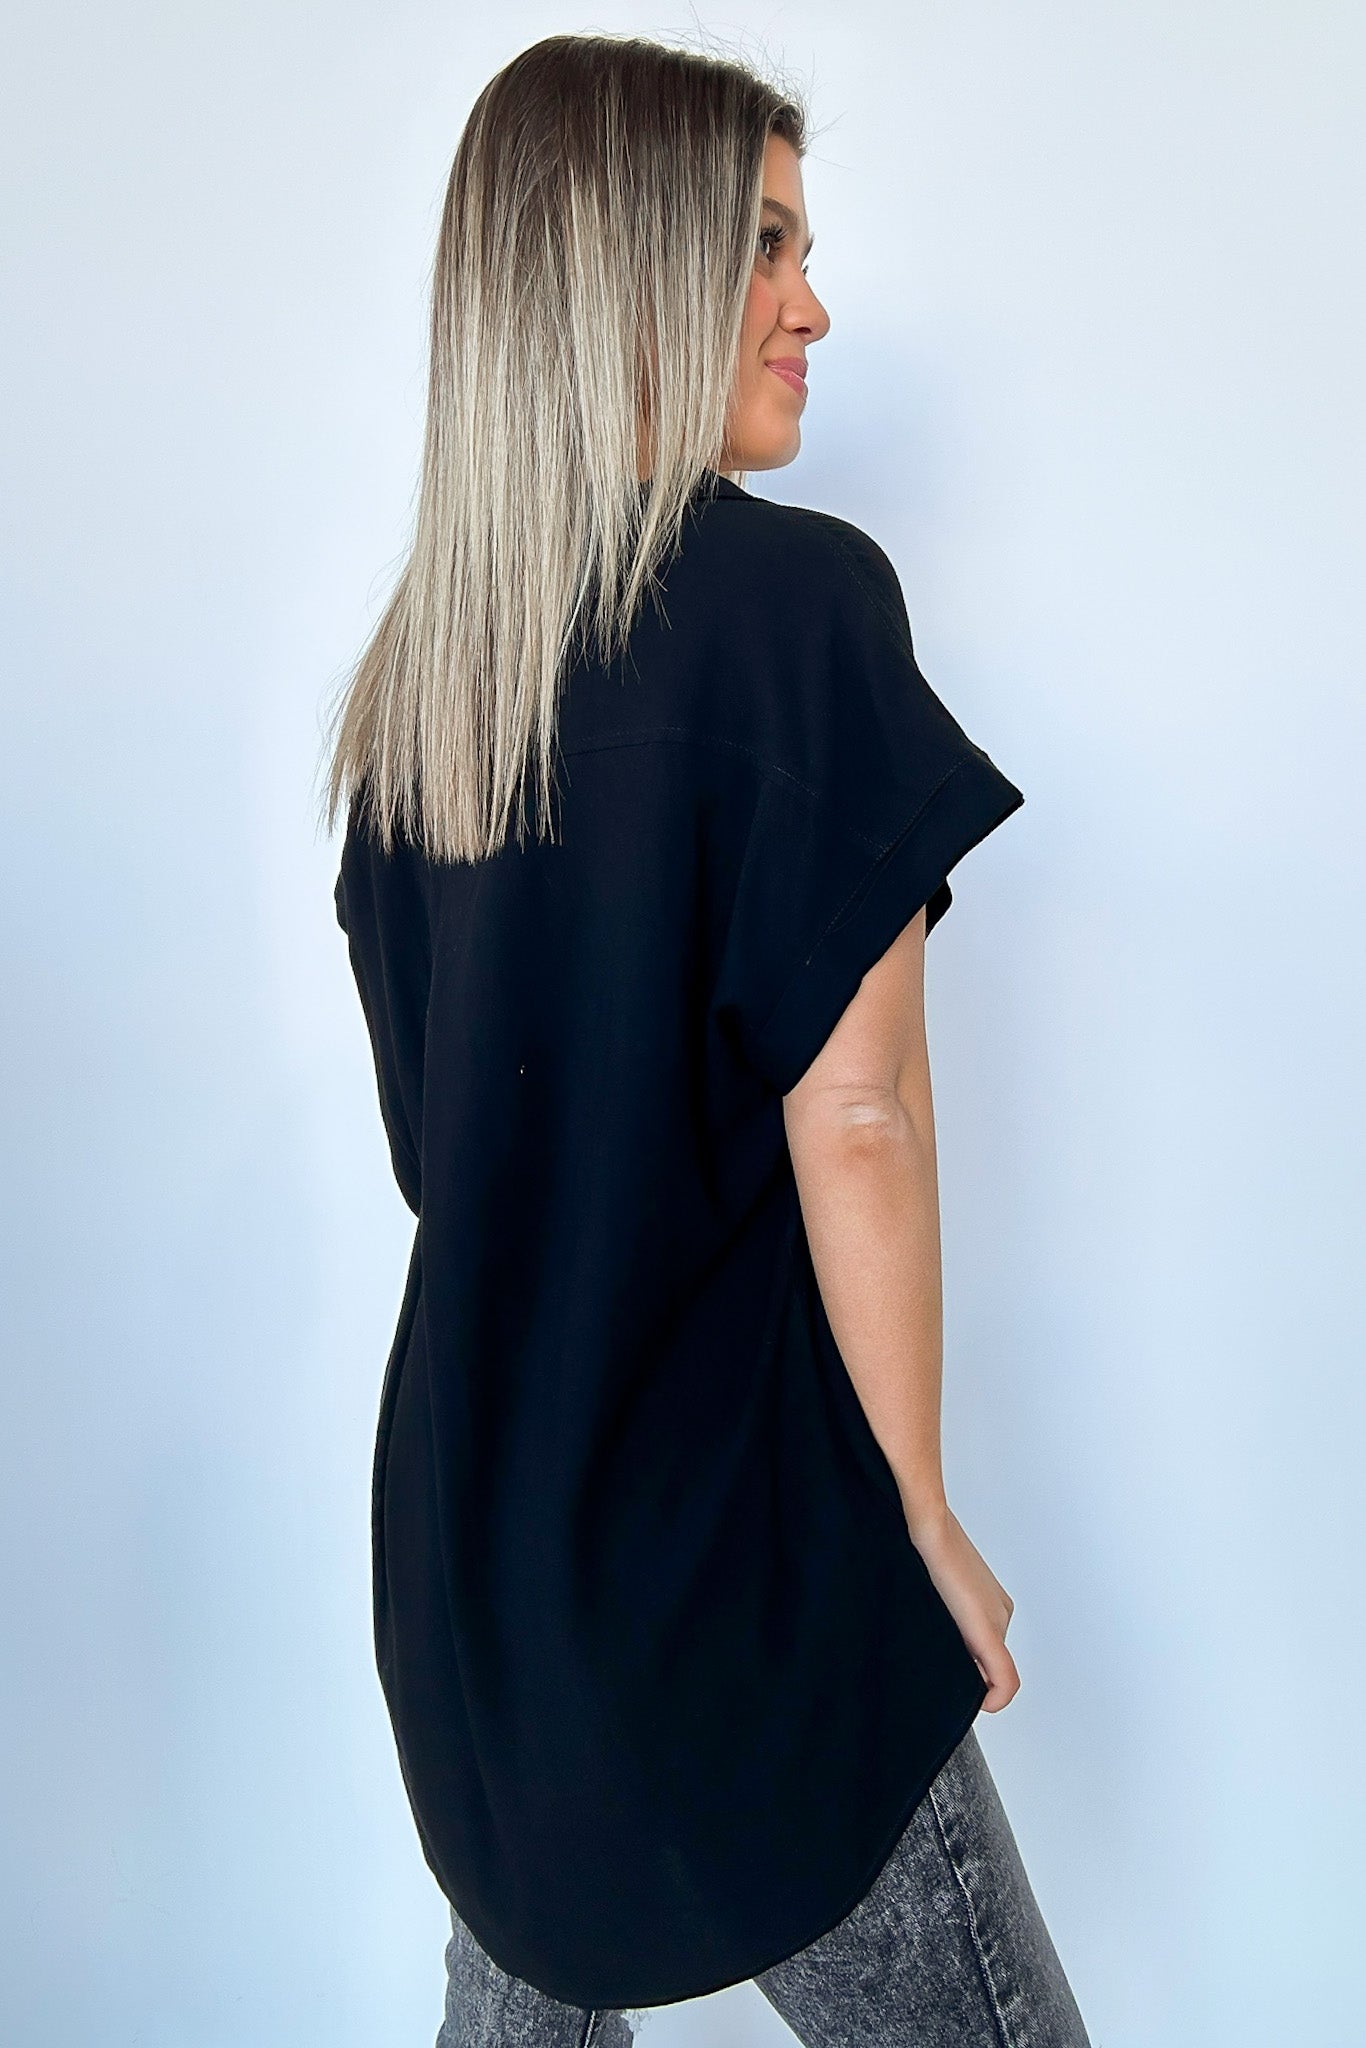  Kavitha Short Sleeve Button Down Tunic Top - Madison and Mallory